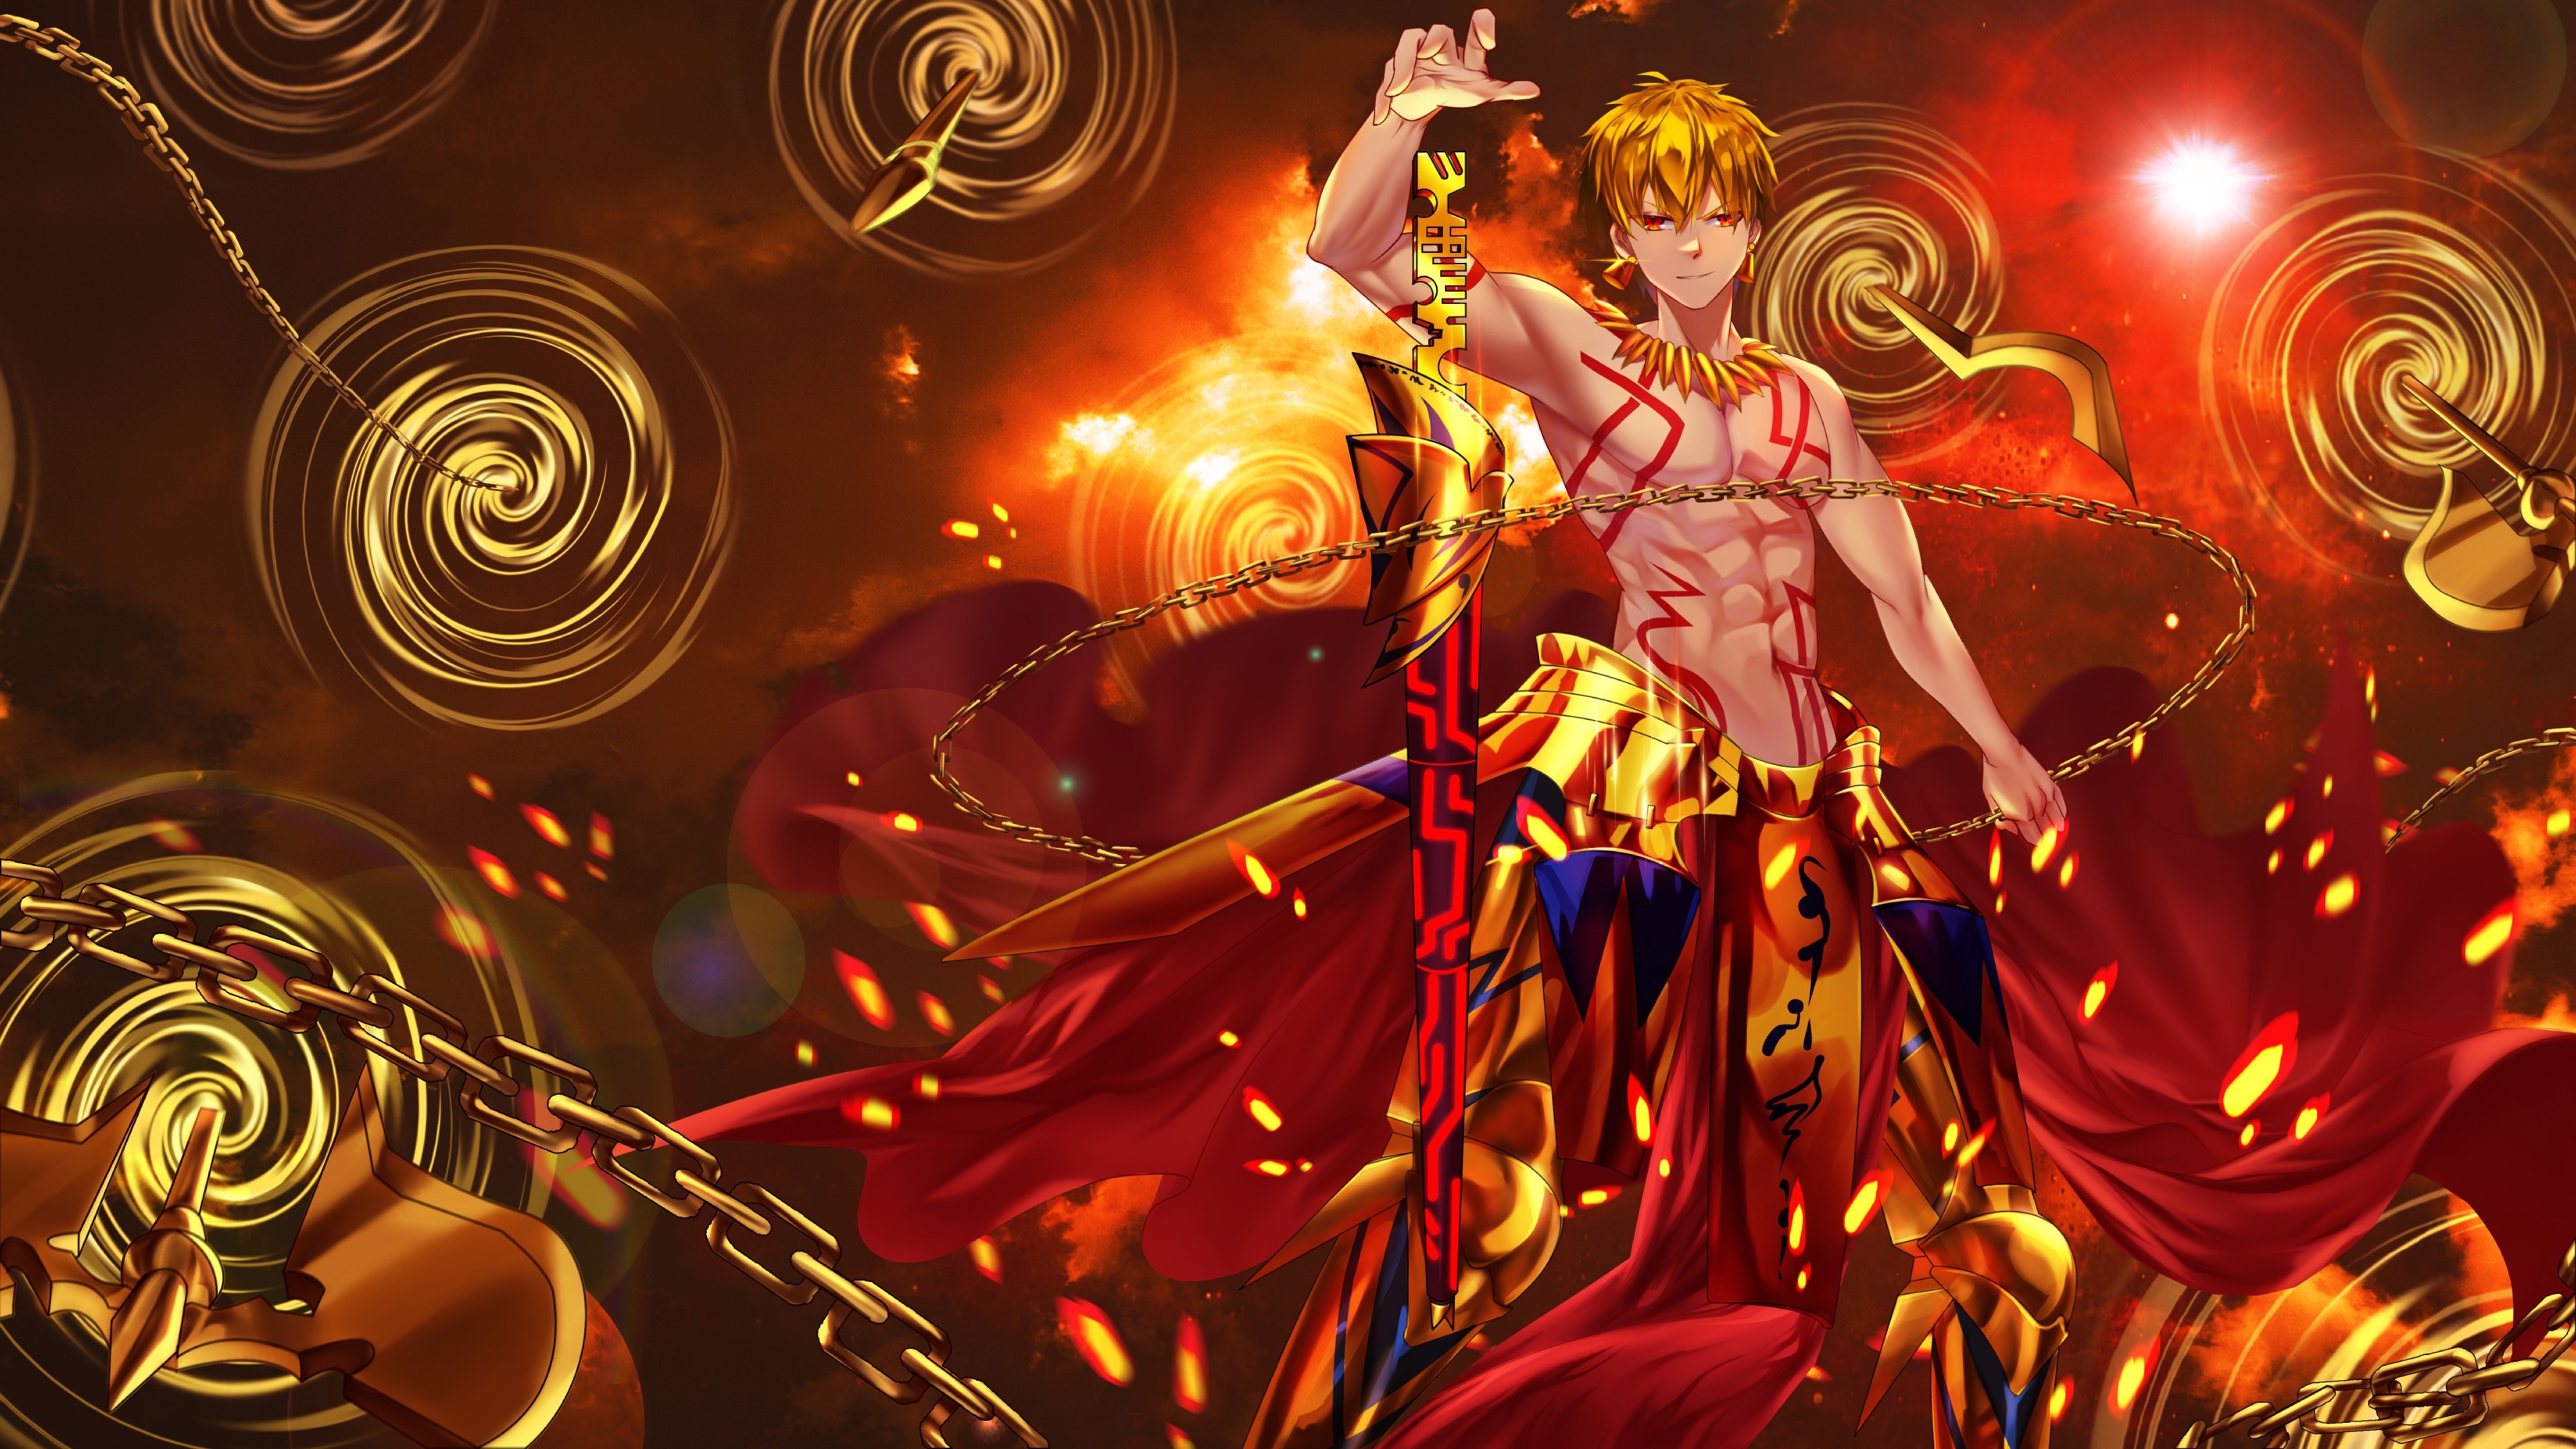 Gilgamesh Fate Anime Wallpaper Hd Anime 4k Wallpapers Images Photos And Background Wallpapers Den